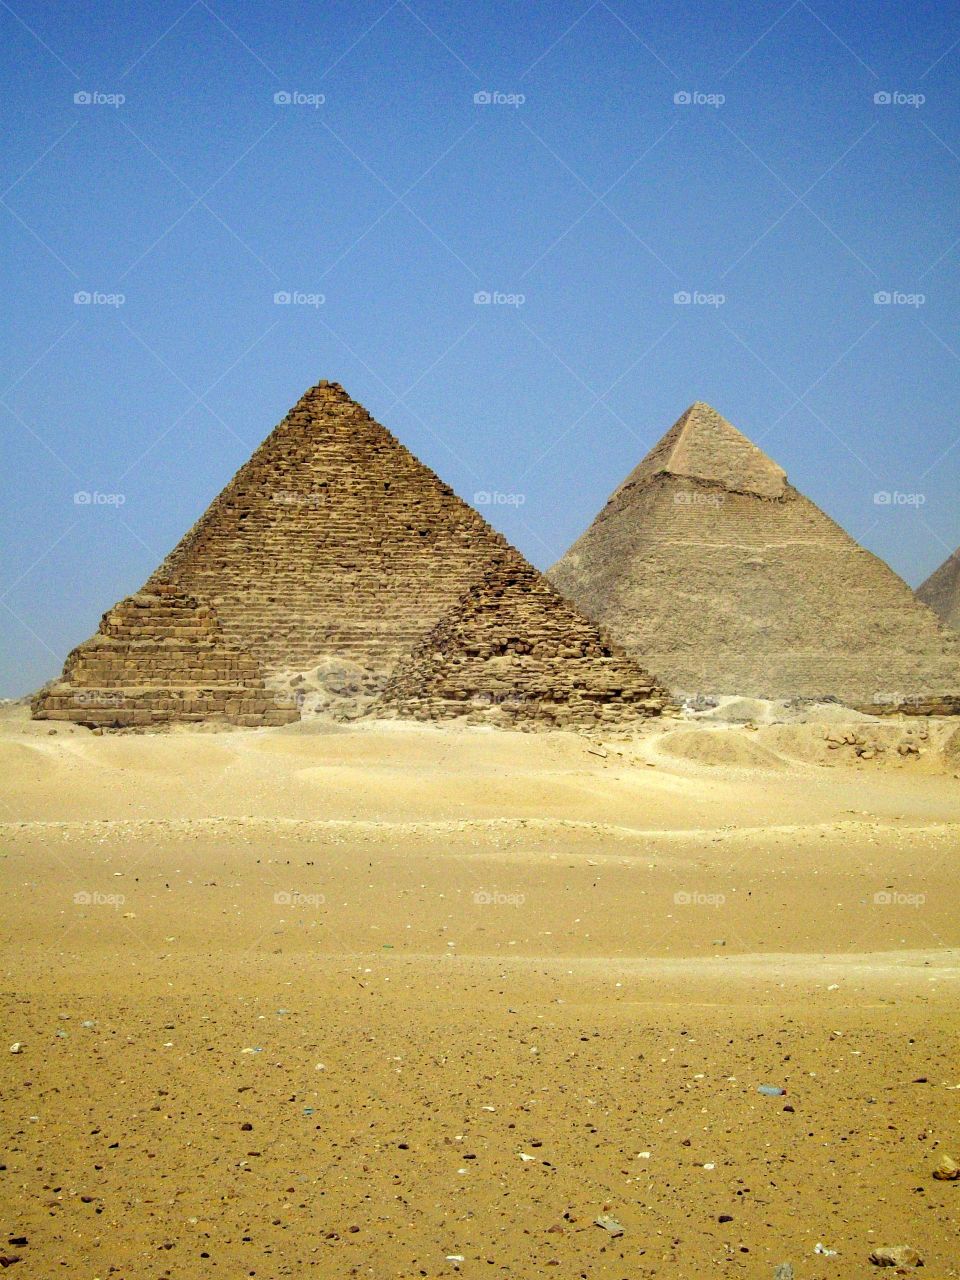 Powerful image of the ancient pyramids 